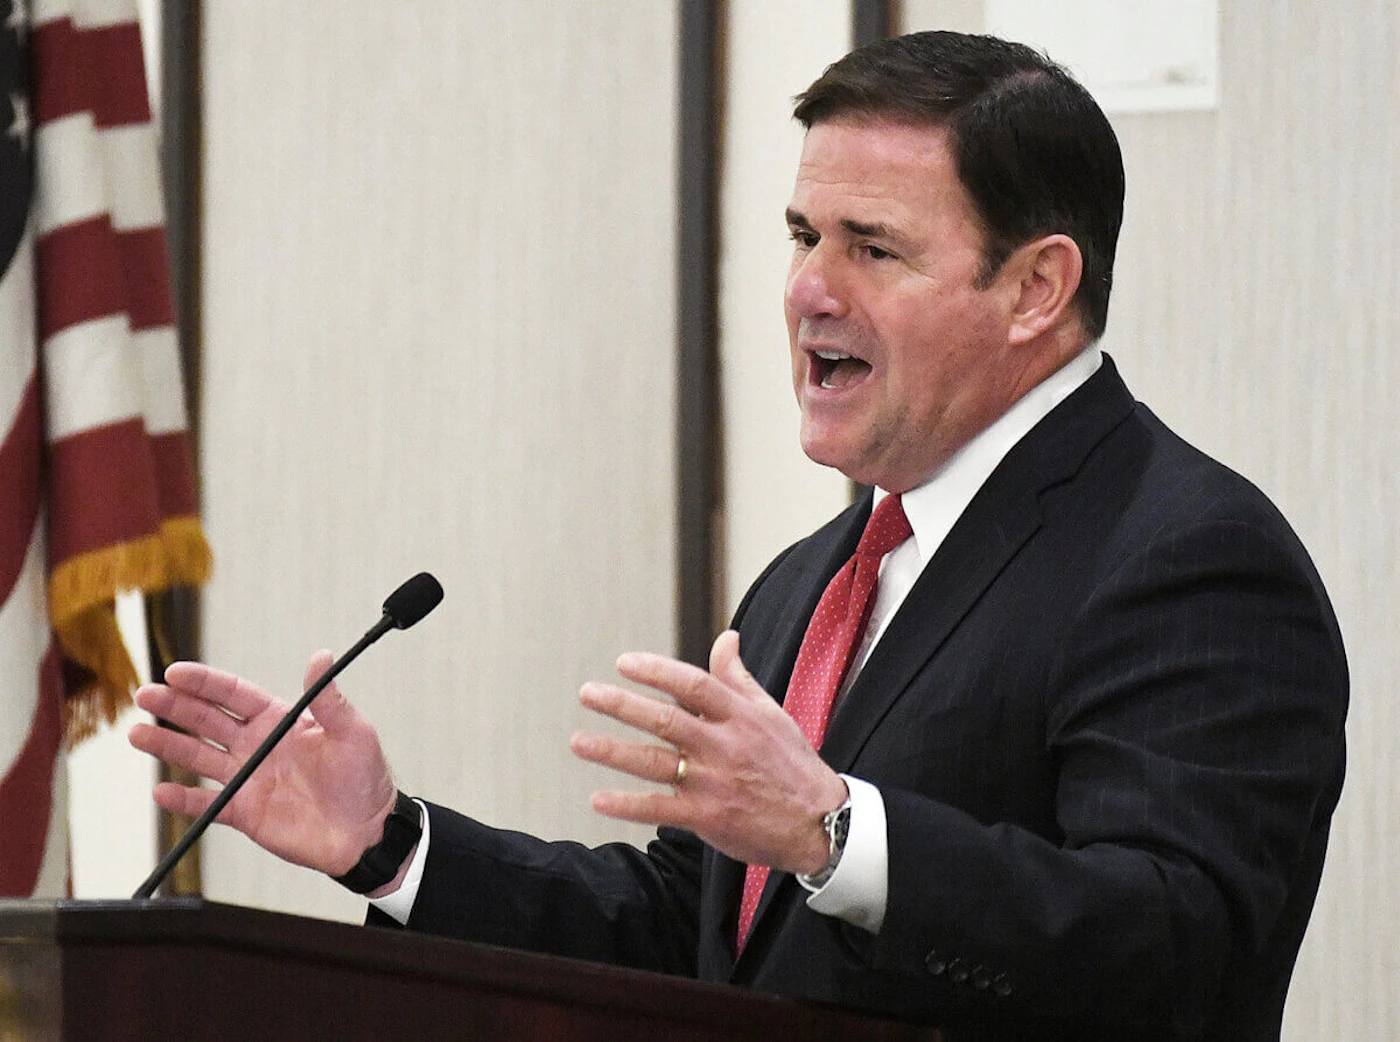 FILE - Arizona Gov. Doug Ducey re-delivers his State of the State address in front of a Yuma crowd Thursday, Feb. 17, 2022 inside Pivot Point Conference Center. The Arizona Supreme Court on Thursday, April 21, 2022, ruled that the state's voters do not have the right to reject a massive income tax cut approved by the Republican-controlled Legislature and Gov, Doug Ducey last year.(Randy Hoeft/The Yuma Sun via AP, File)